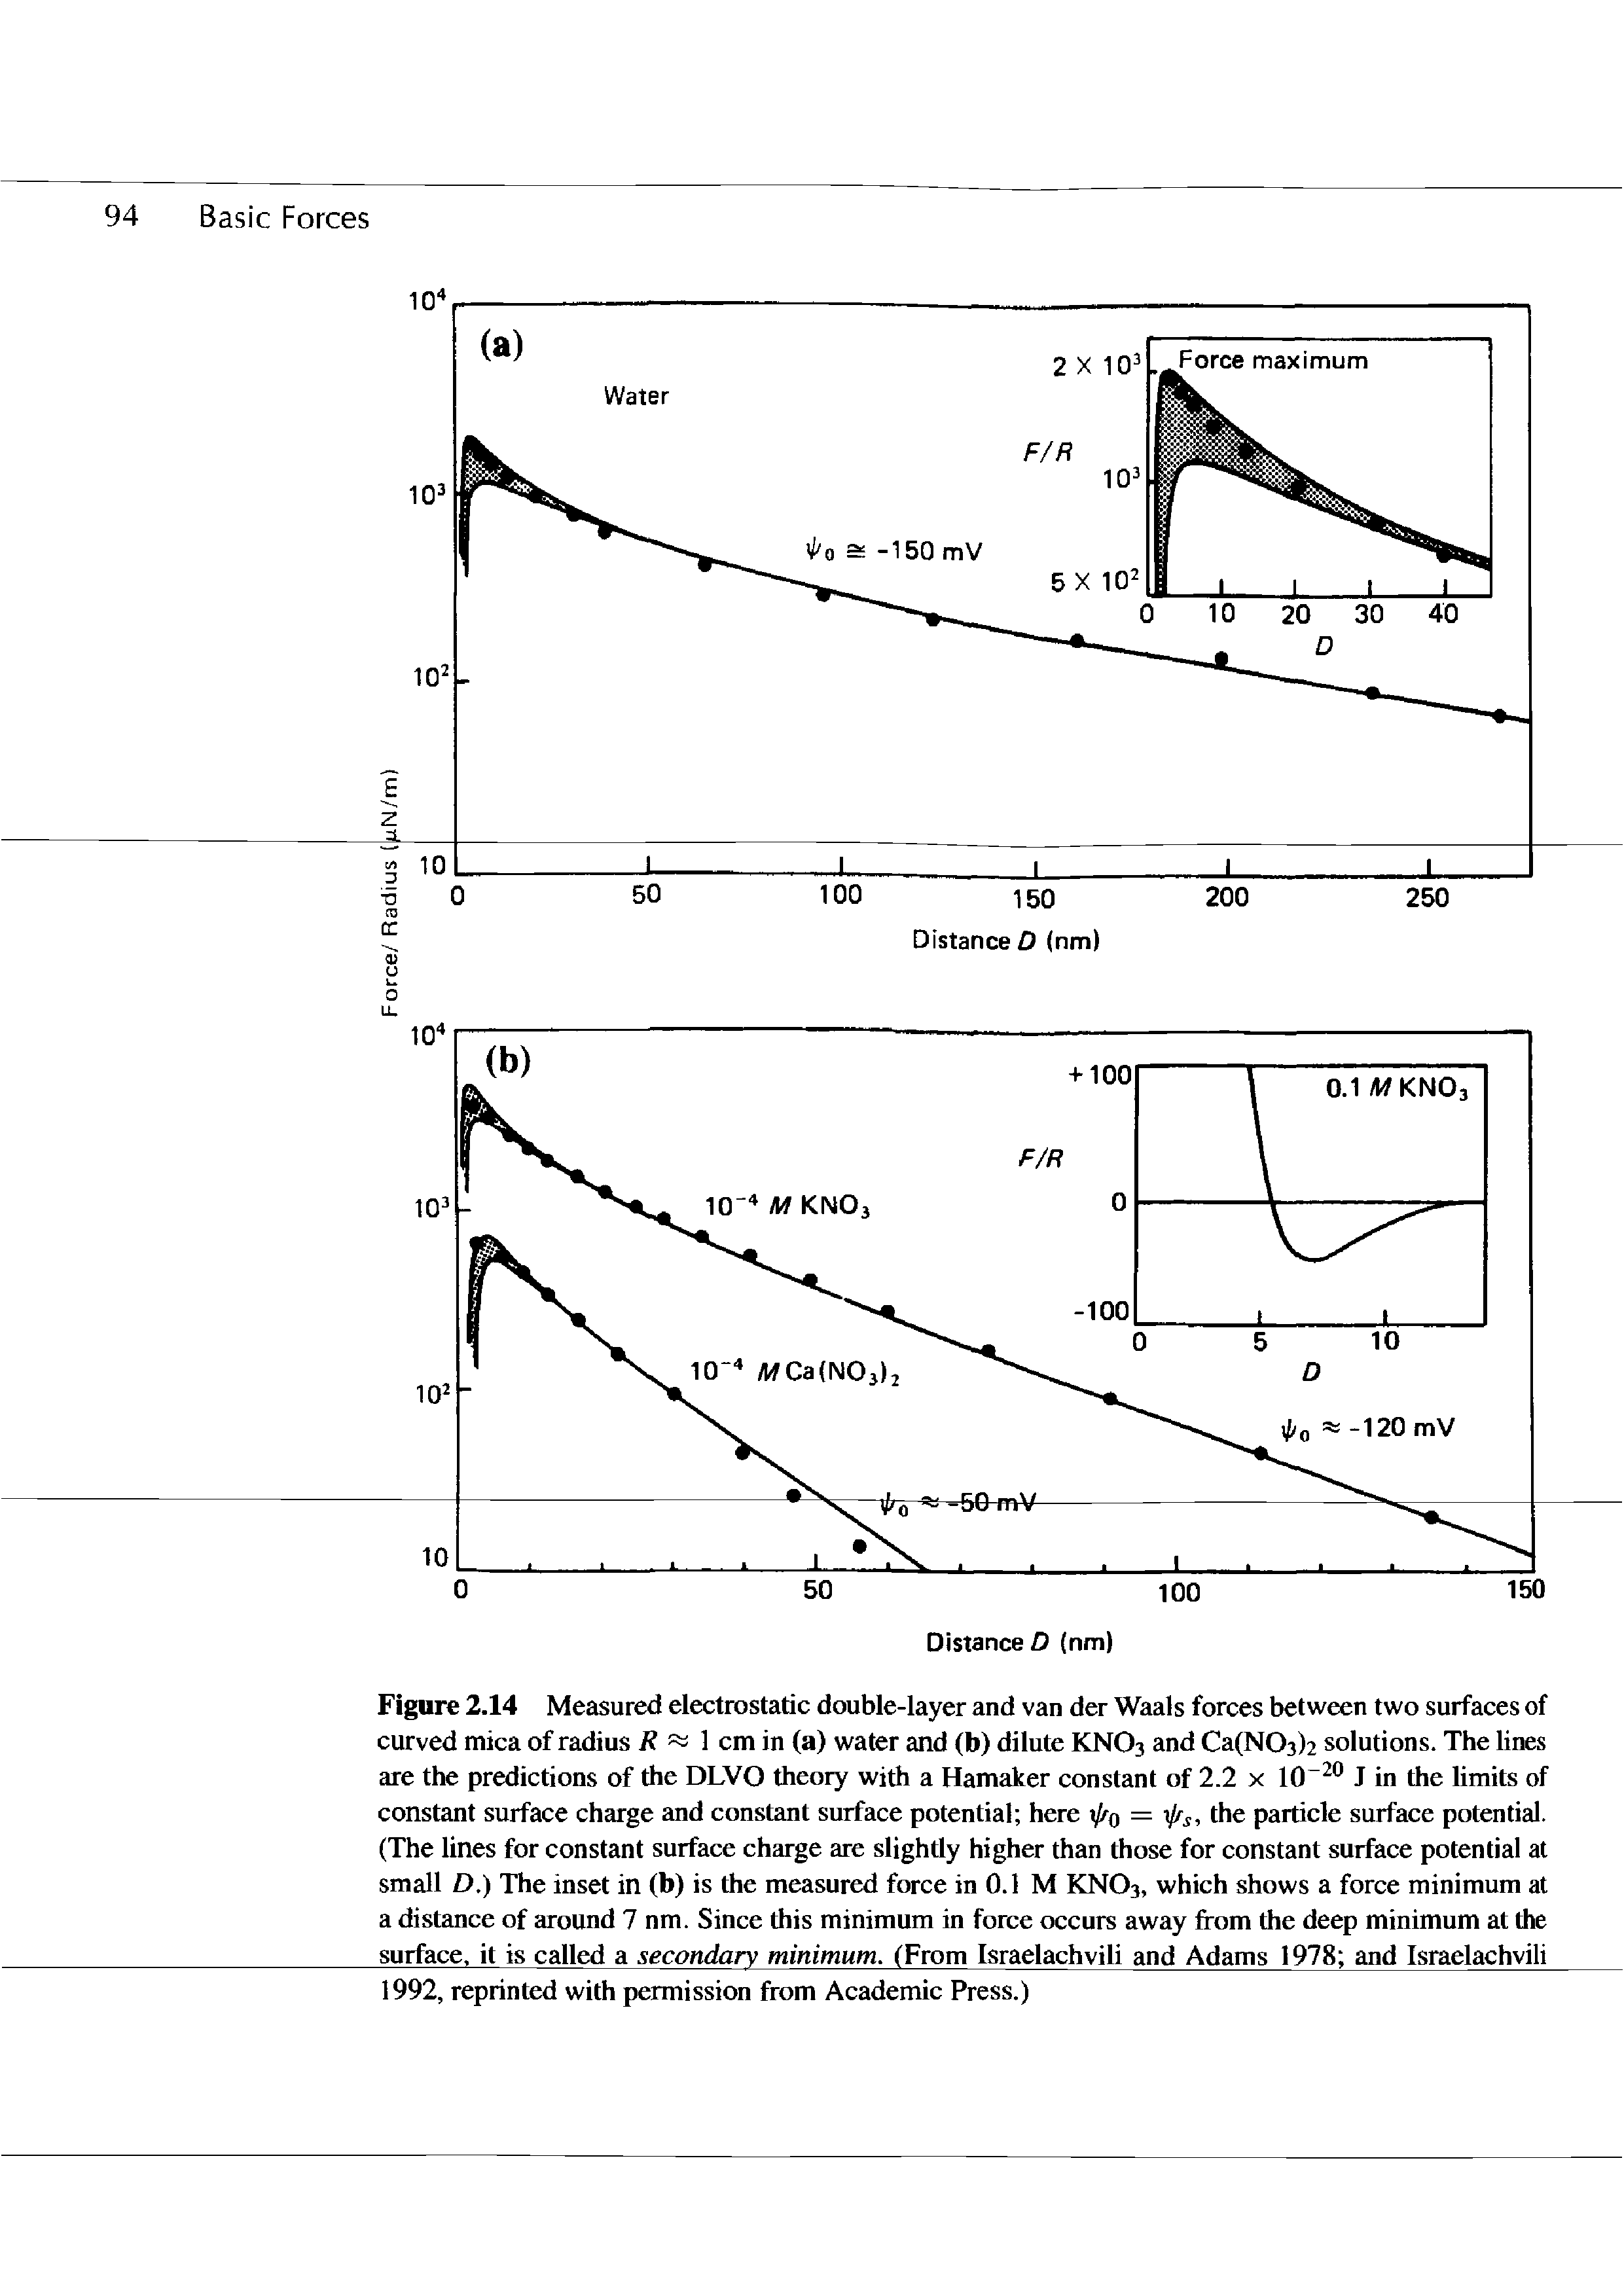 Figure 2.14 Measured electrostatic double-layer and van der Waals forces between two surfaces of curved mica of radius 1 cm in (a) water and (b) dilute KNO3 and Ca(N03)2 solutions. The lines are the predictions of the DLVO theory with a Hamaker constant of 2.2 x 10 J in the limits of constant surface charge and constant surface potential here xfrQ = -(j/s, the particle surface potential. (The lines for constant surface charge are slightly higher than those for constant surface potential at small D.) The inset in (b) is the measured force in 0.1 M KNO3, which shows a force minimum at a distance of around 7 nm. Since this minimum in force occurs away from the deep minimum at the surface, it is called a secondary minimum. (From Israelachvili and Adams 1978 and Israelachvili 1992, reprinted with permission from Academic Press.)...